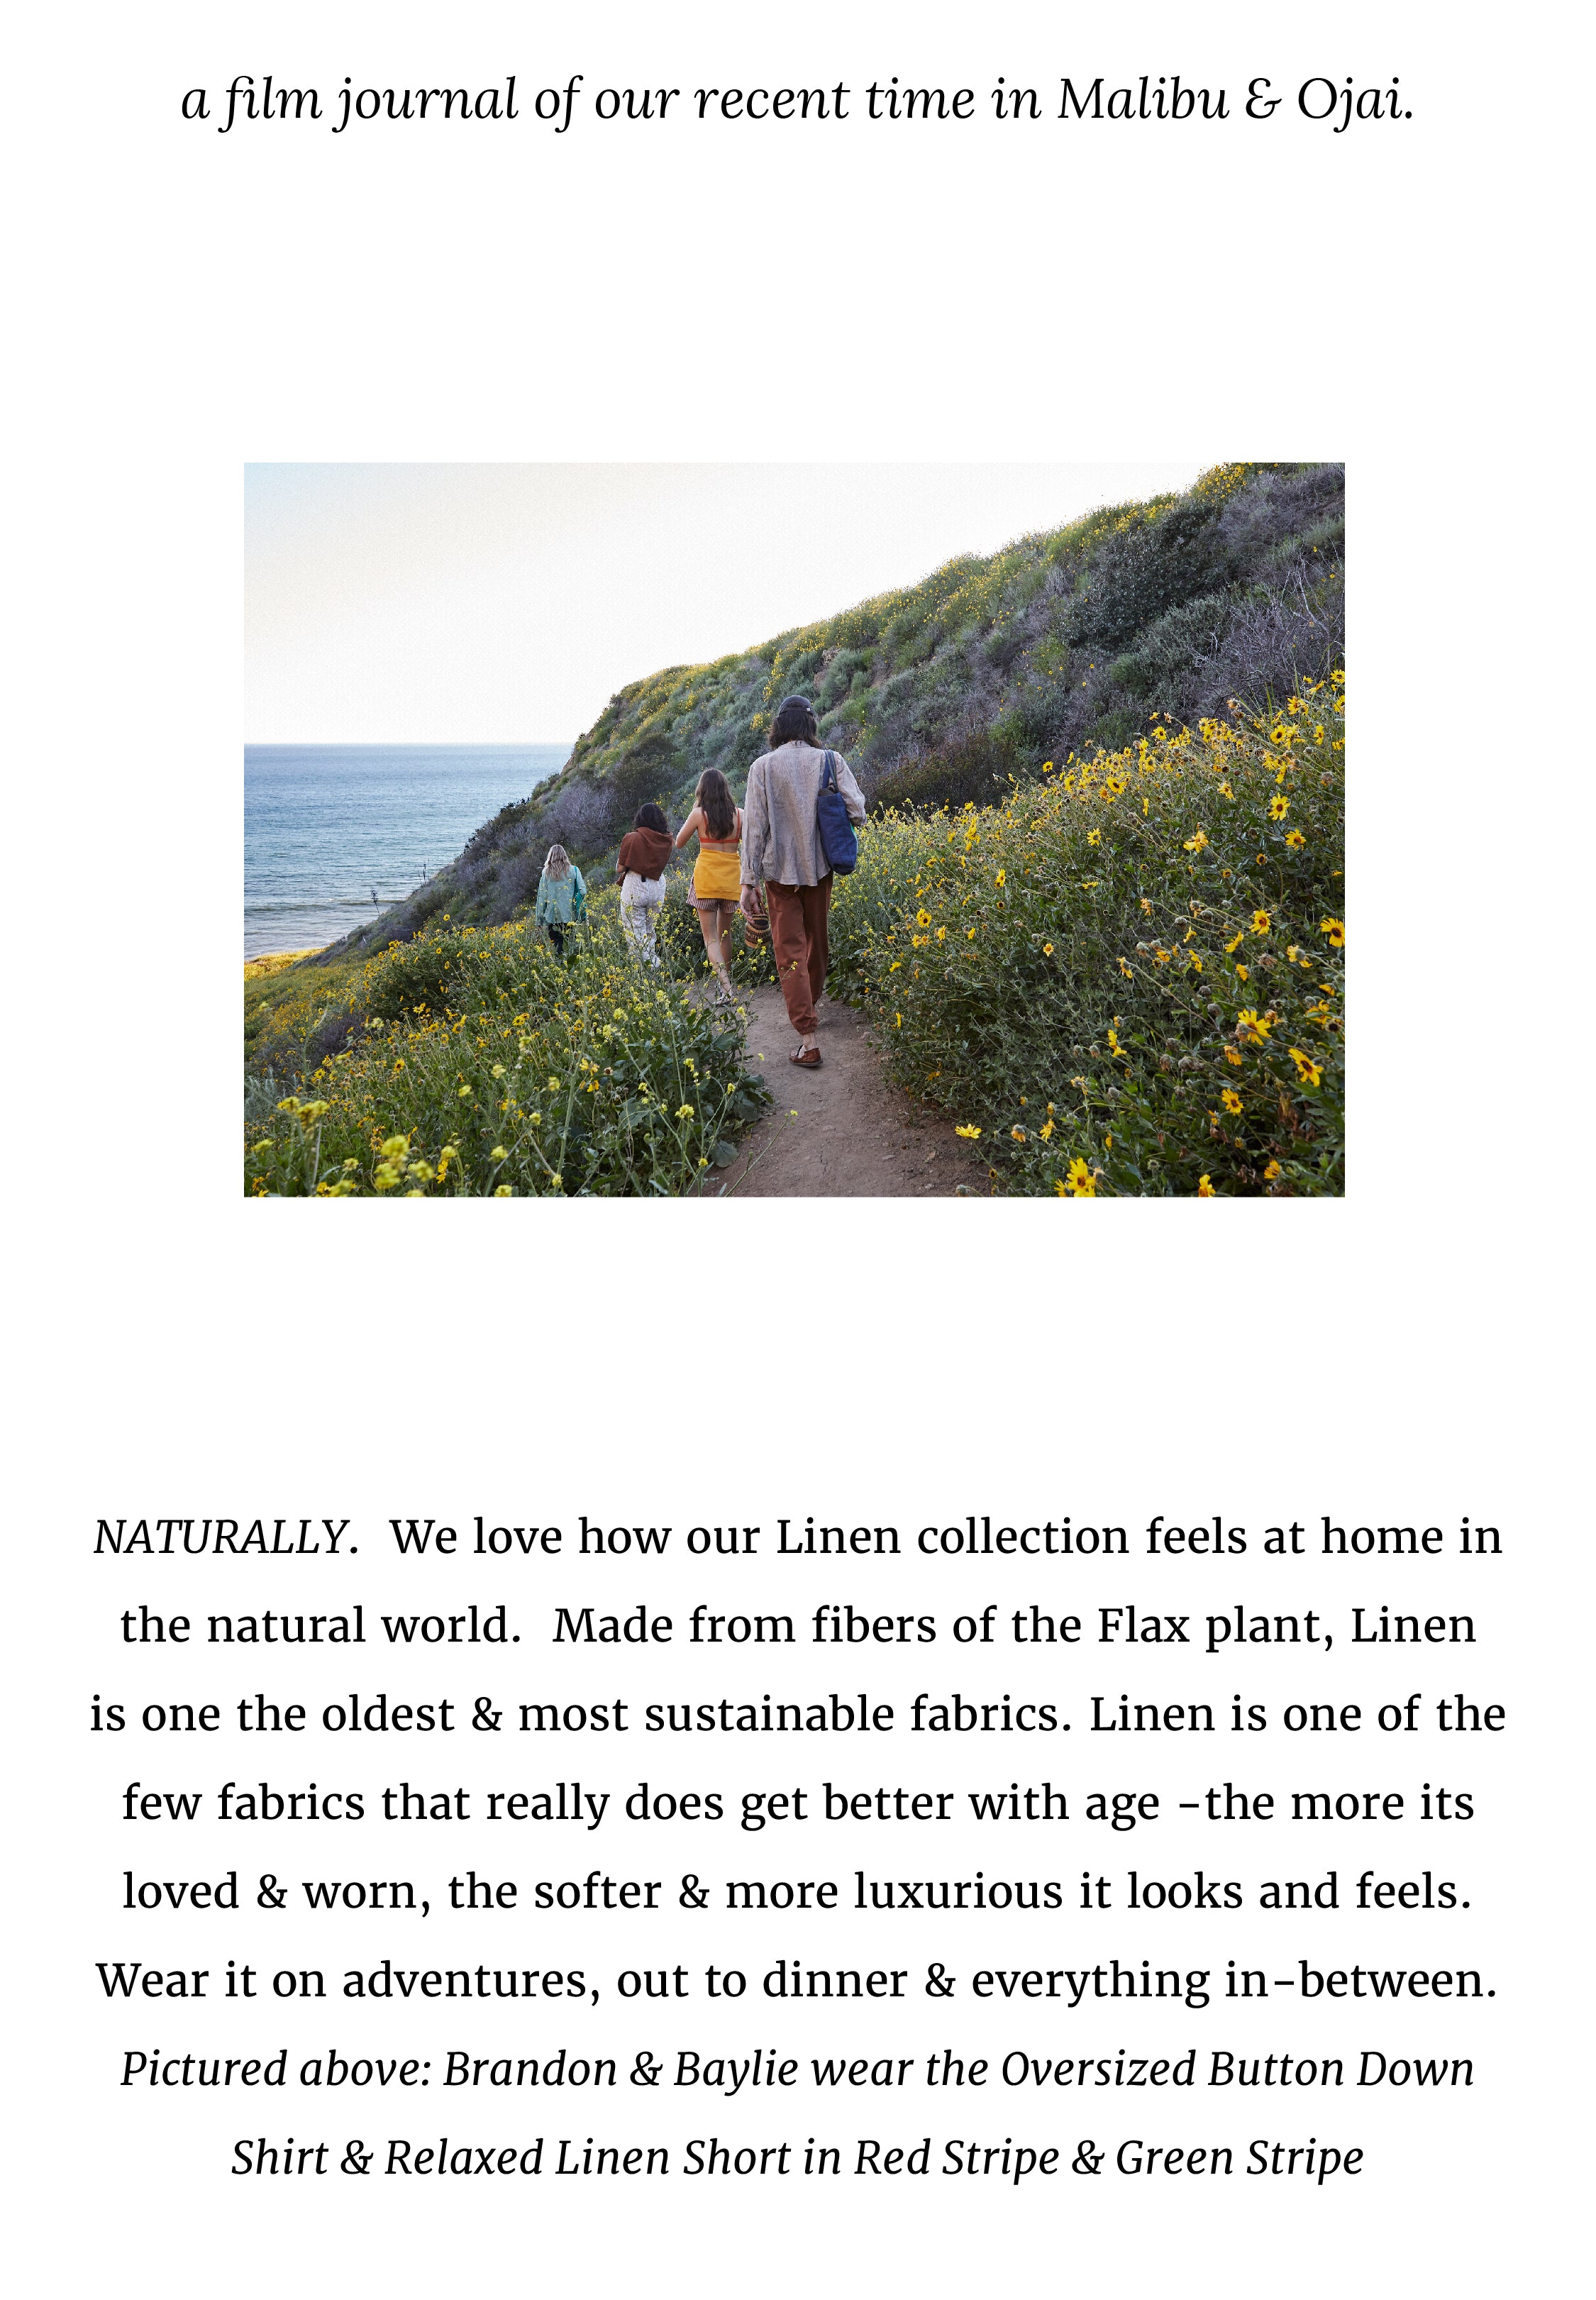 NATURALLY.  We love how our Linen collection feels at home in the natural world.  Made from fibers of the Flax plant, Linen  is one the oldest & most sustainable fabrics. Linen is one of the few fabrics that really does get better with age -the more its loved & worn, the softer & more luxurious it looks and feels.  Wear it on adventures, out to dinner & everything in-between. Pictured above: Brandon & Baylie wear the Oversized Button Down  Shirt & Relaxed Linen Short in Red Stripe & Green Stripe